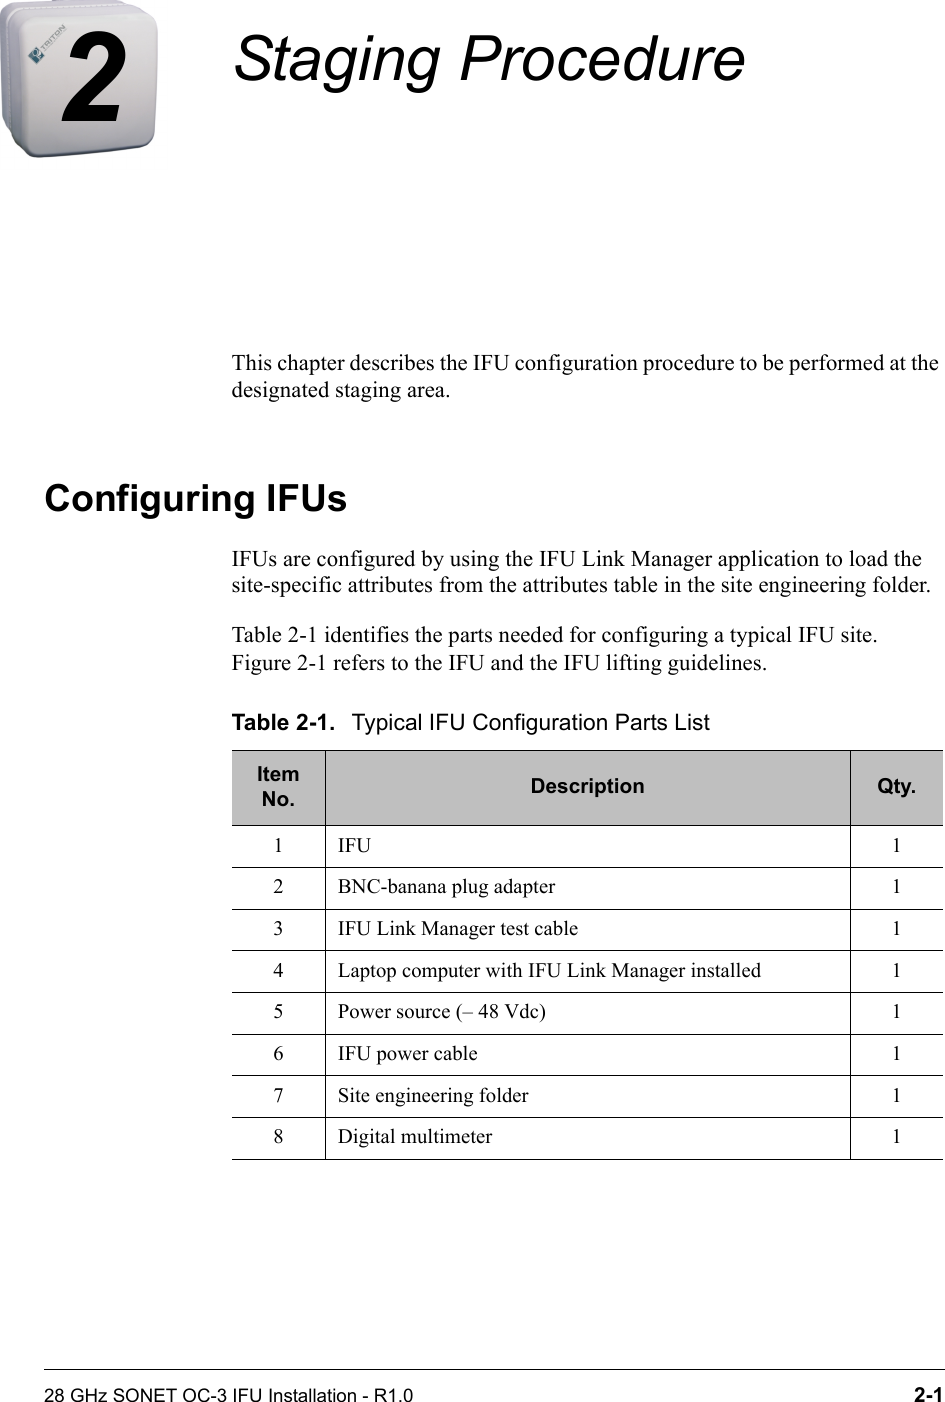 28 GHz SONET OC-3 IFU Installation - R1.0 2-12Staging ProcedureThis chapter describes the IFU configuration procedure to be performed at the designated staging area.Configuring IFUsIFUs are configured by using the IFU Link Manager application to load the site-specific attributes from the attributes table in the site engineering folder. Table 2-1 identifies the parts needed for configuring a typical IFU site. Figure 2-1 refers to the IFU and the IFU lifting guidelines. Table 2-1. Typical IFU Configuration Parts ListItem No. Description Qty.1IFU 12 BNC-banana plug adapter 13 IFU Link Manager test cable  14 Laptop computer with IFU Link Manager installed 15 Power source (– 48 Vdc)  16 IFU power cable 17 Site engineering folder 18 Digital multimeter 1